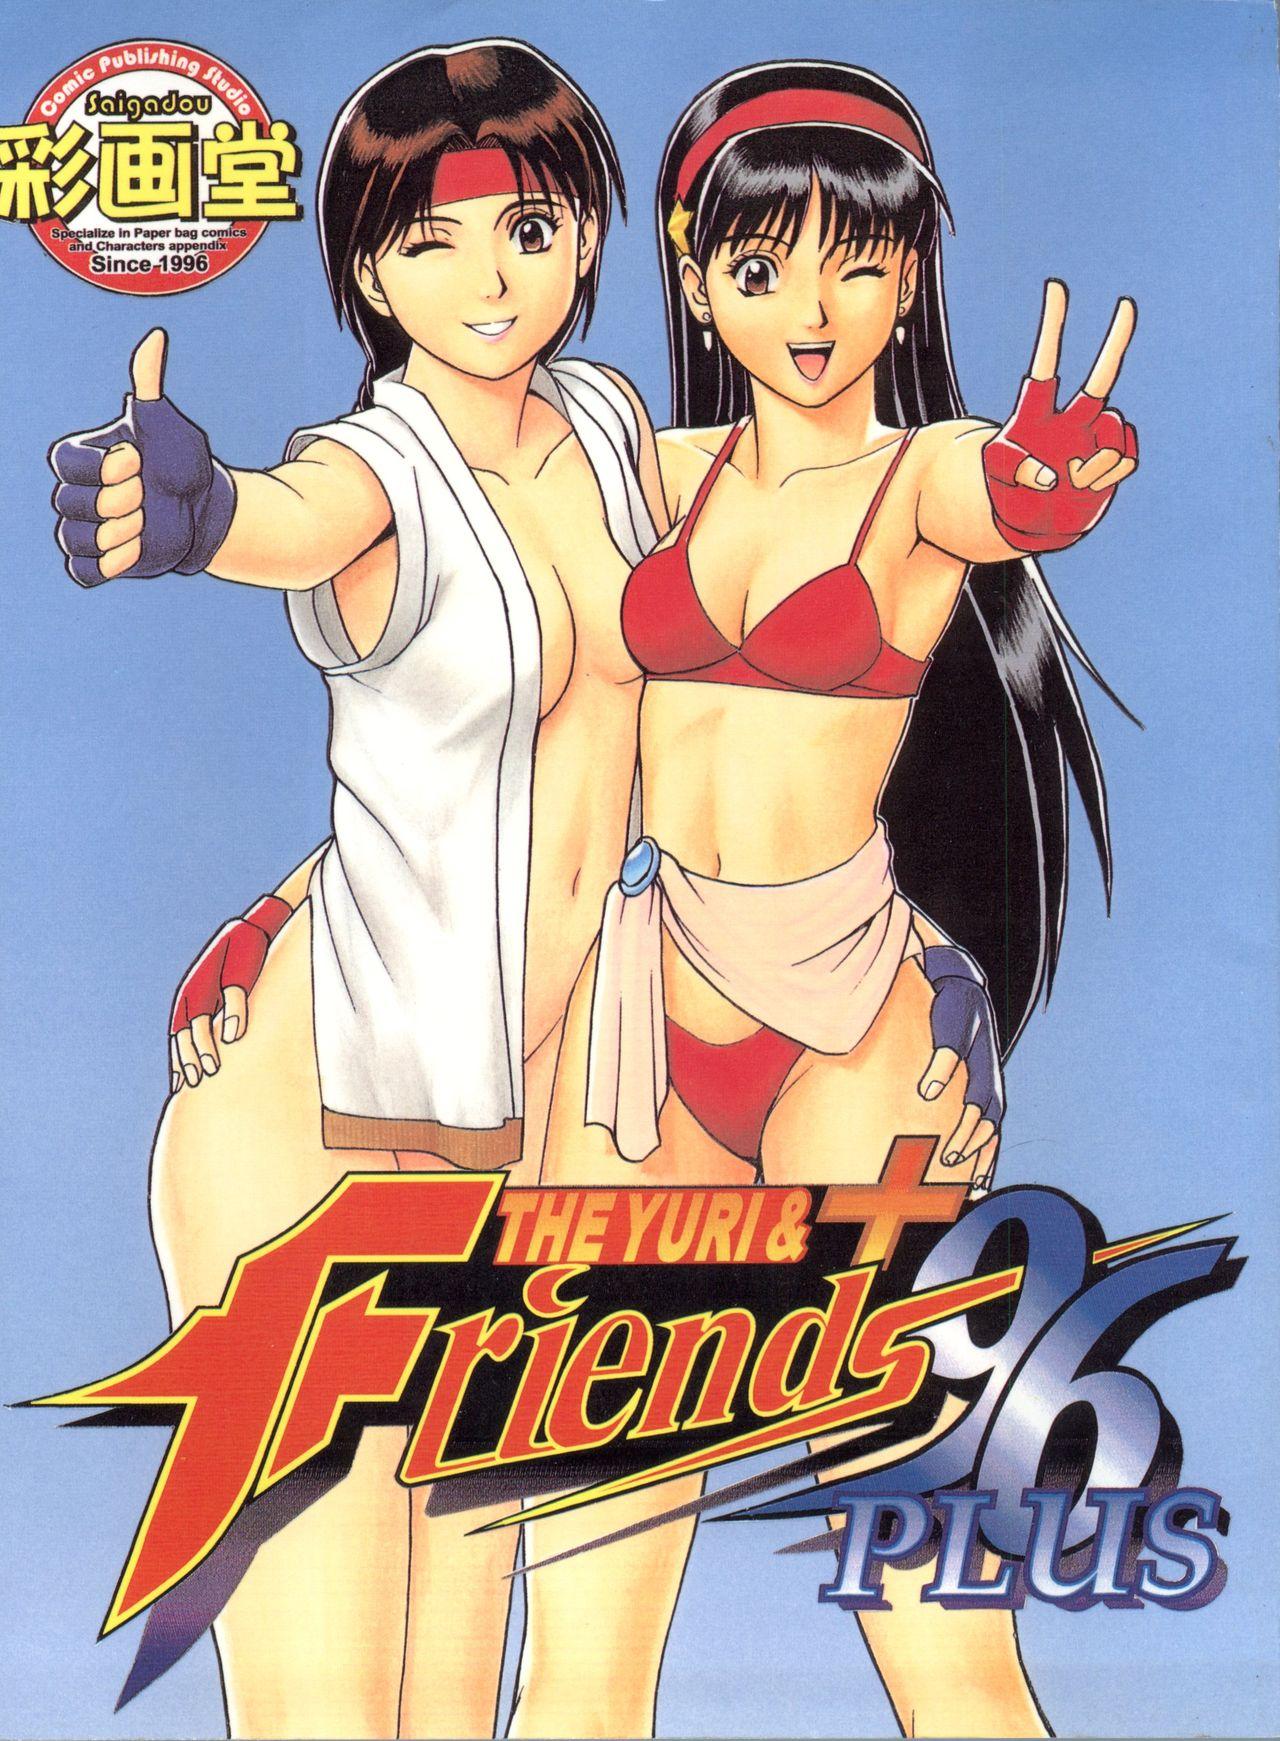 Hentai The Yuri&Friends '96 Plus - King of fighters Topless - Page 1